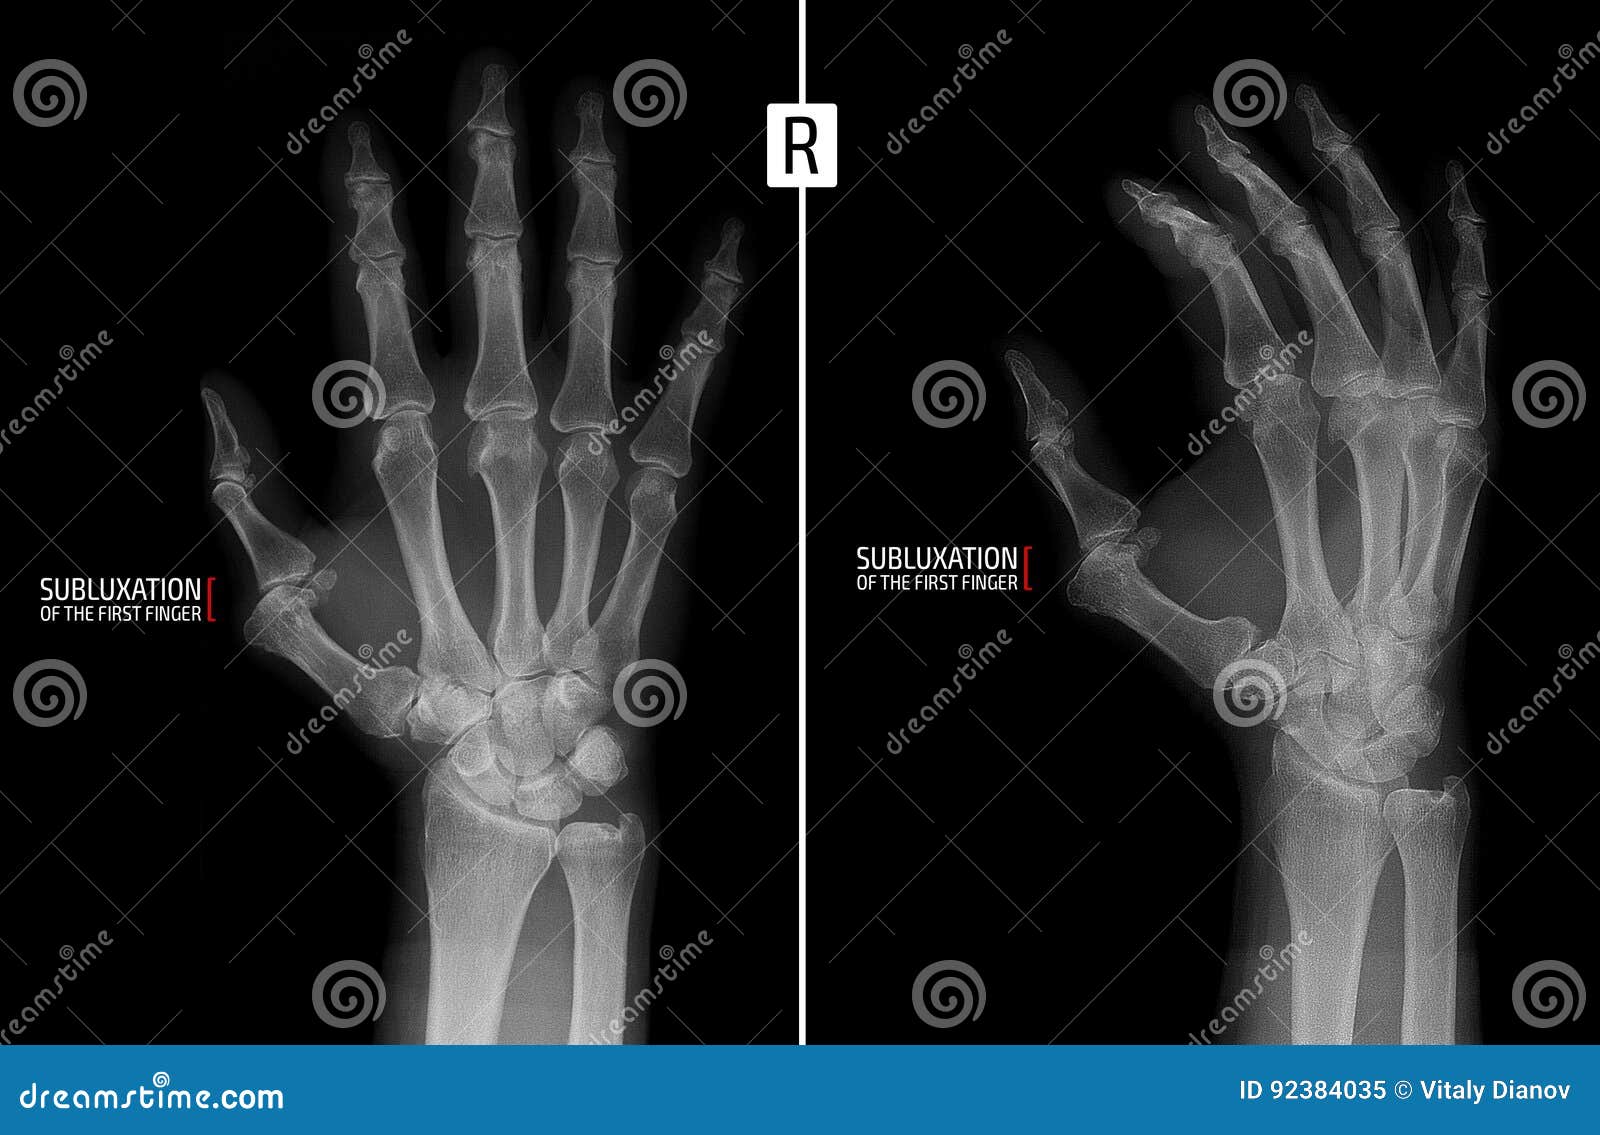 x-ray of the hand. shows the subluxation of the proximal phalanx of the first finger of the right hand. marker.